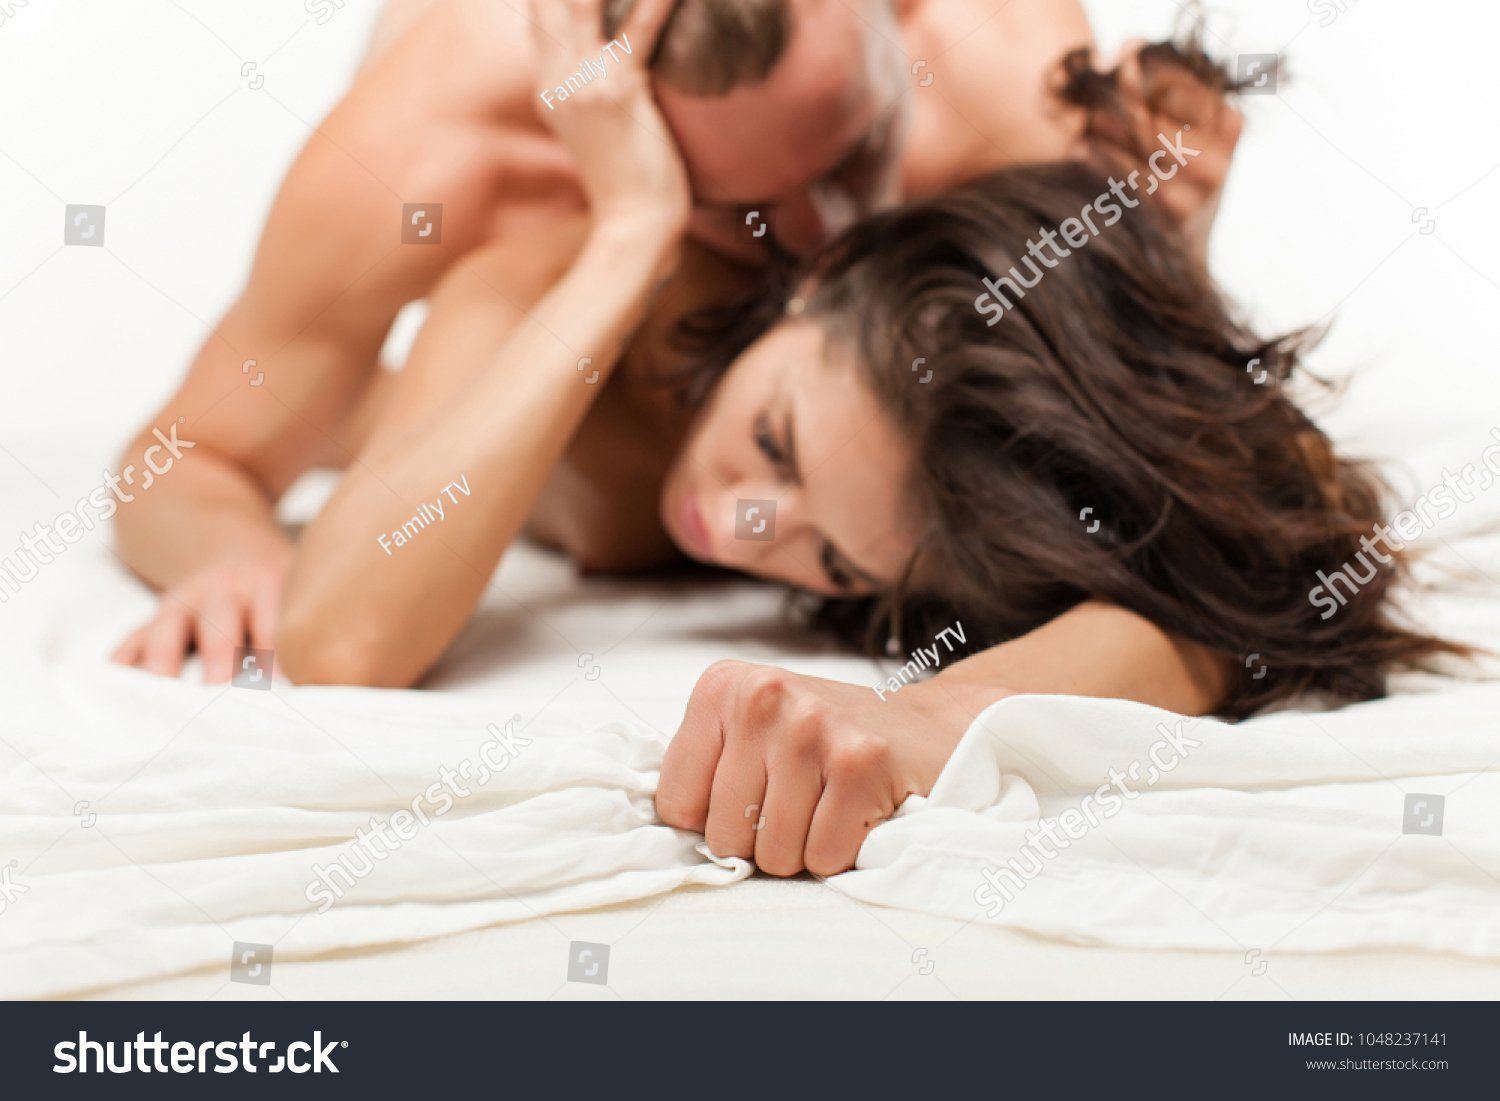 Nude boy and girl kissing passionately